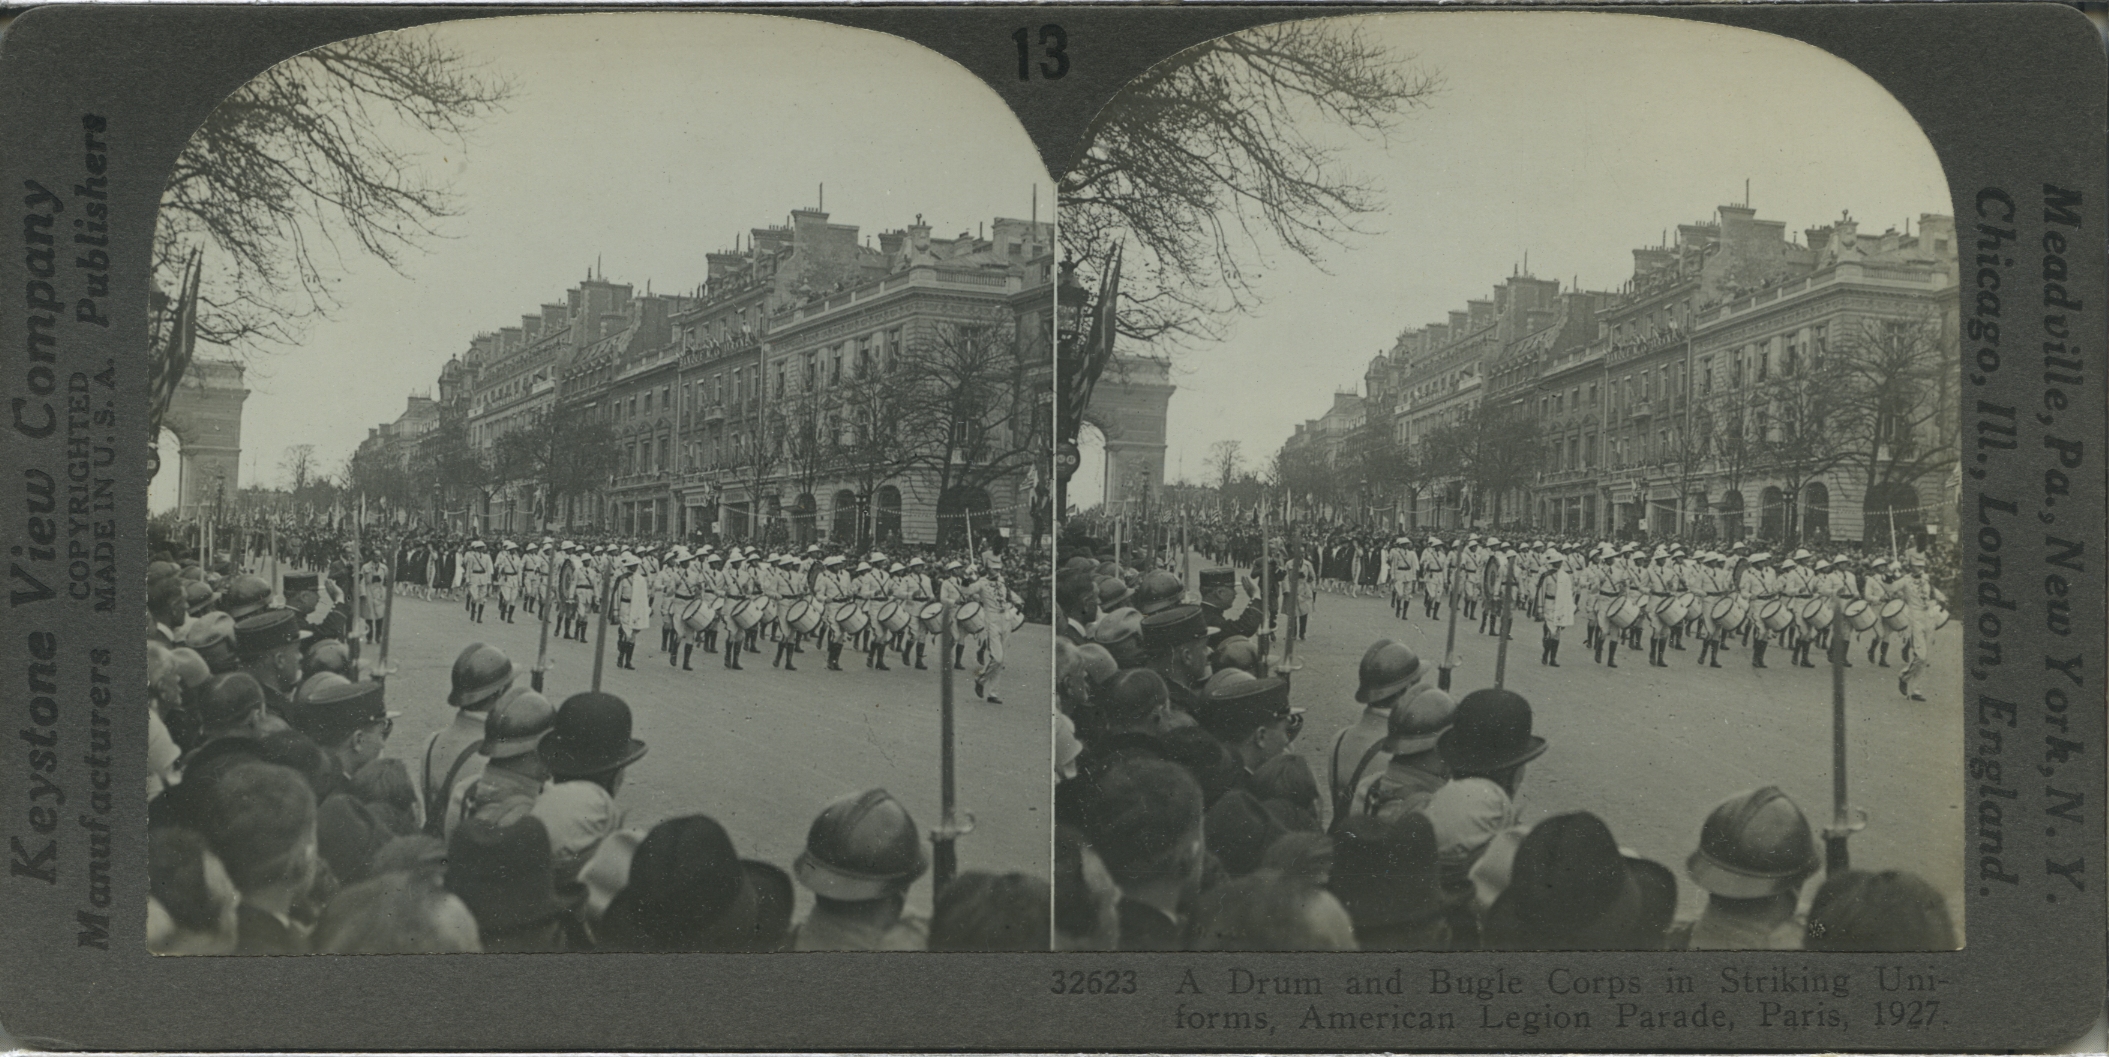 A Drum and Bugle Corps in Striking Uniforms, American Legion Parade, Paris, 1927.